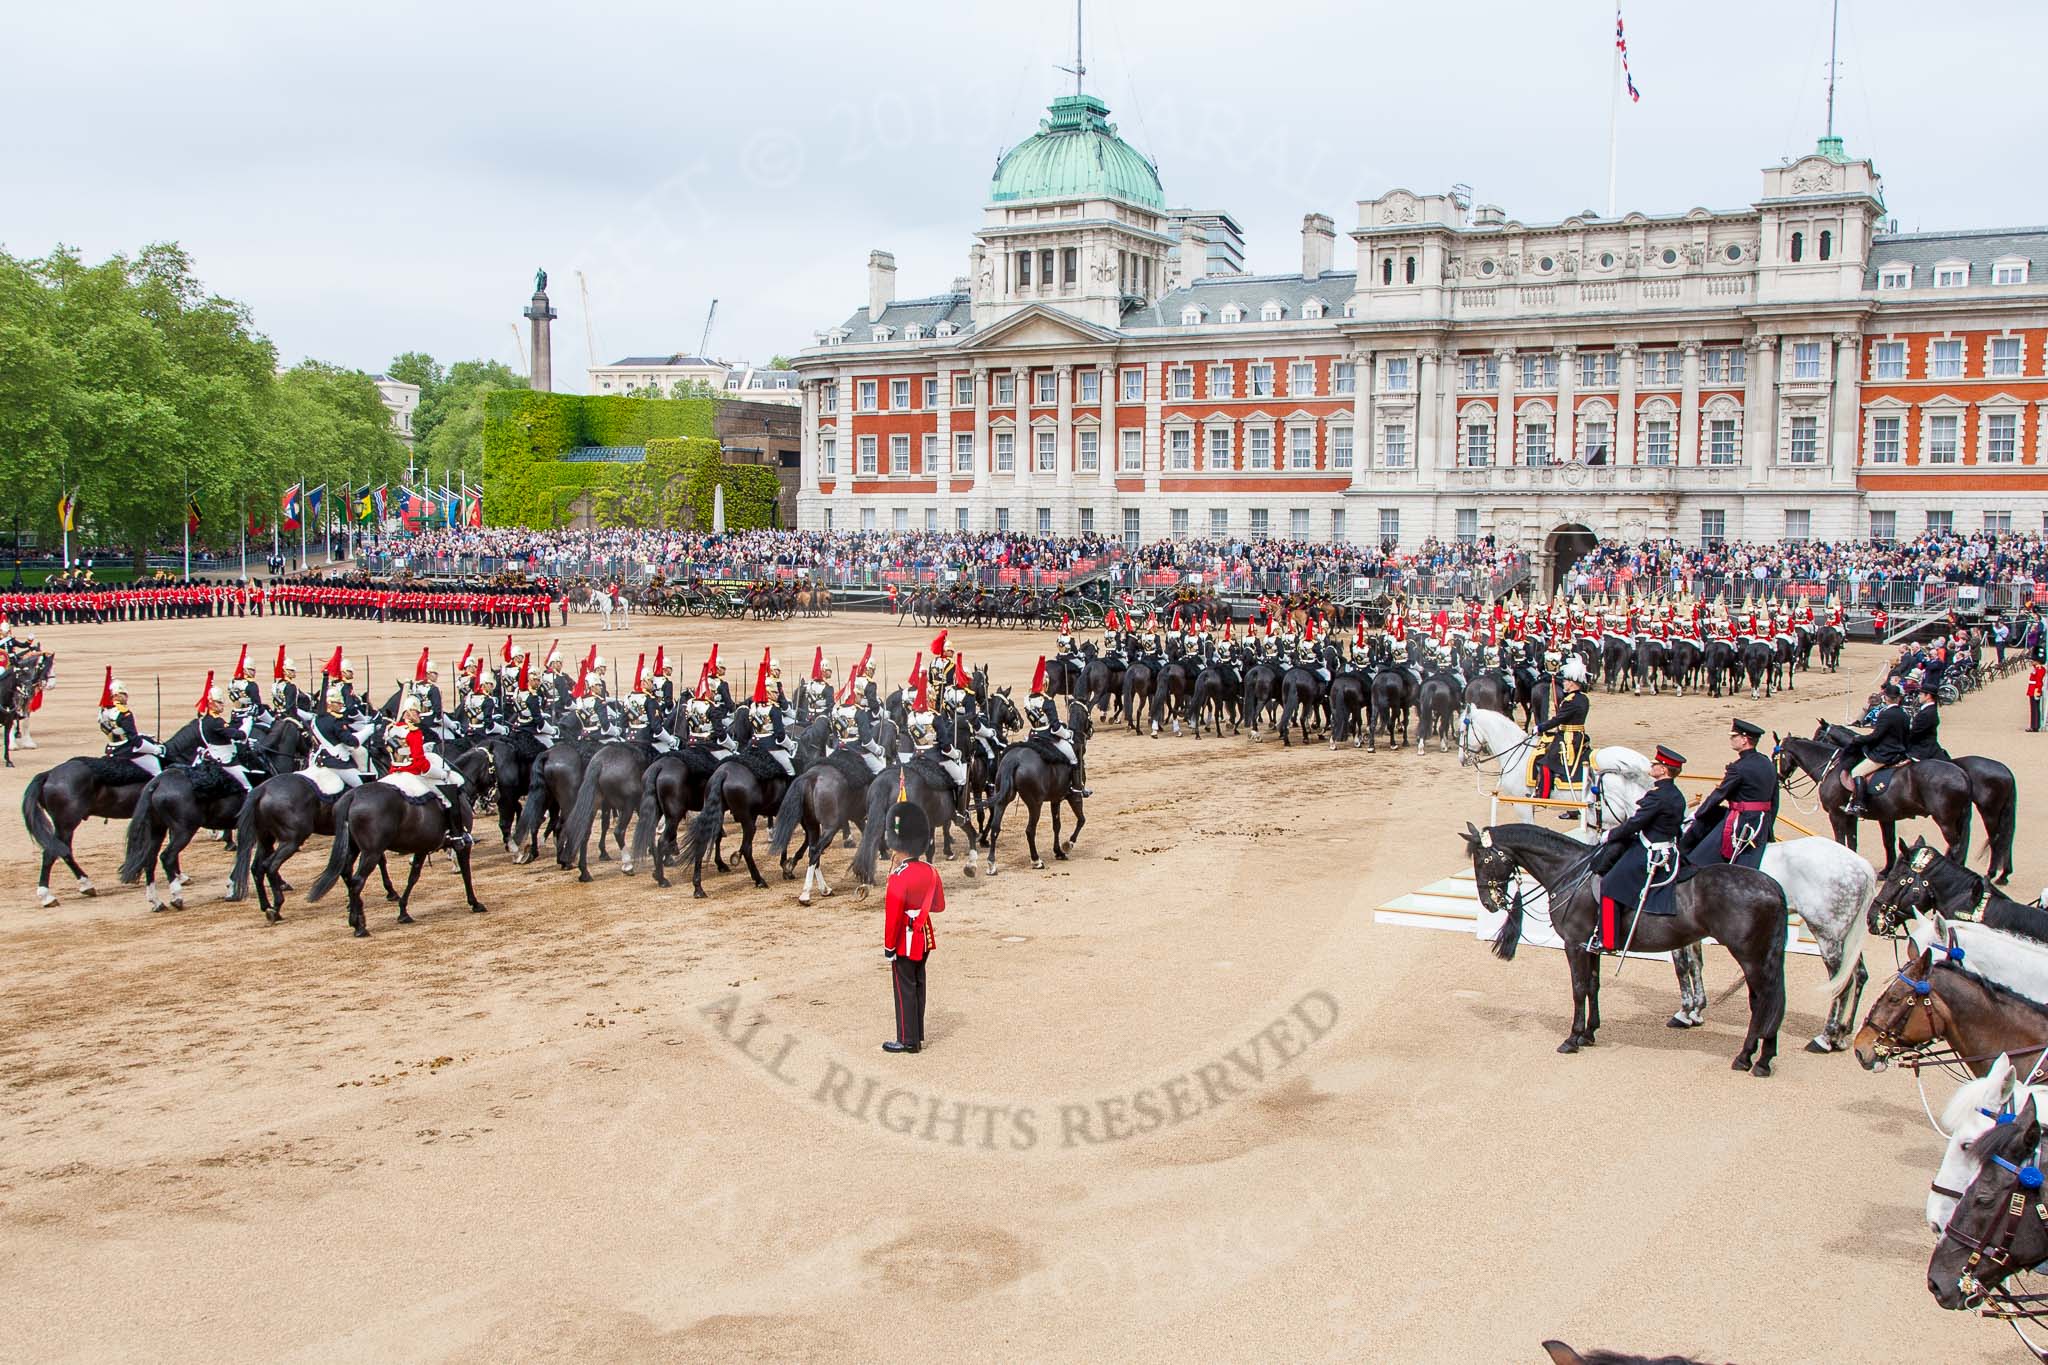 Major General's Review 2013: The Third and Forth Divisions of the Sovereign's Escort, The Blues and Royals, during the Ride Past..
Horse Guards Parade, Westminster,
London SW1,

United Kingdom,
on 01 June 2013 at 11:54, image #632